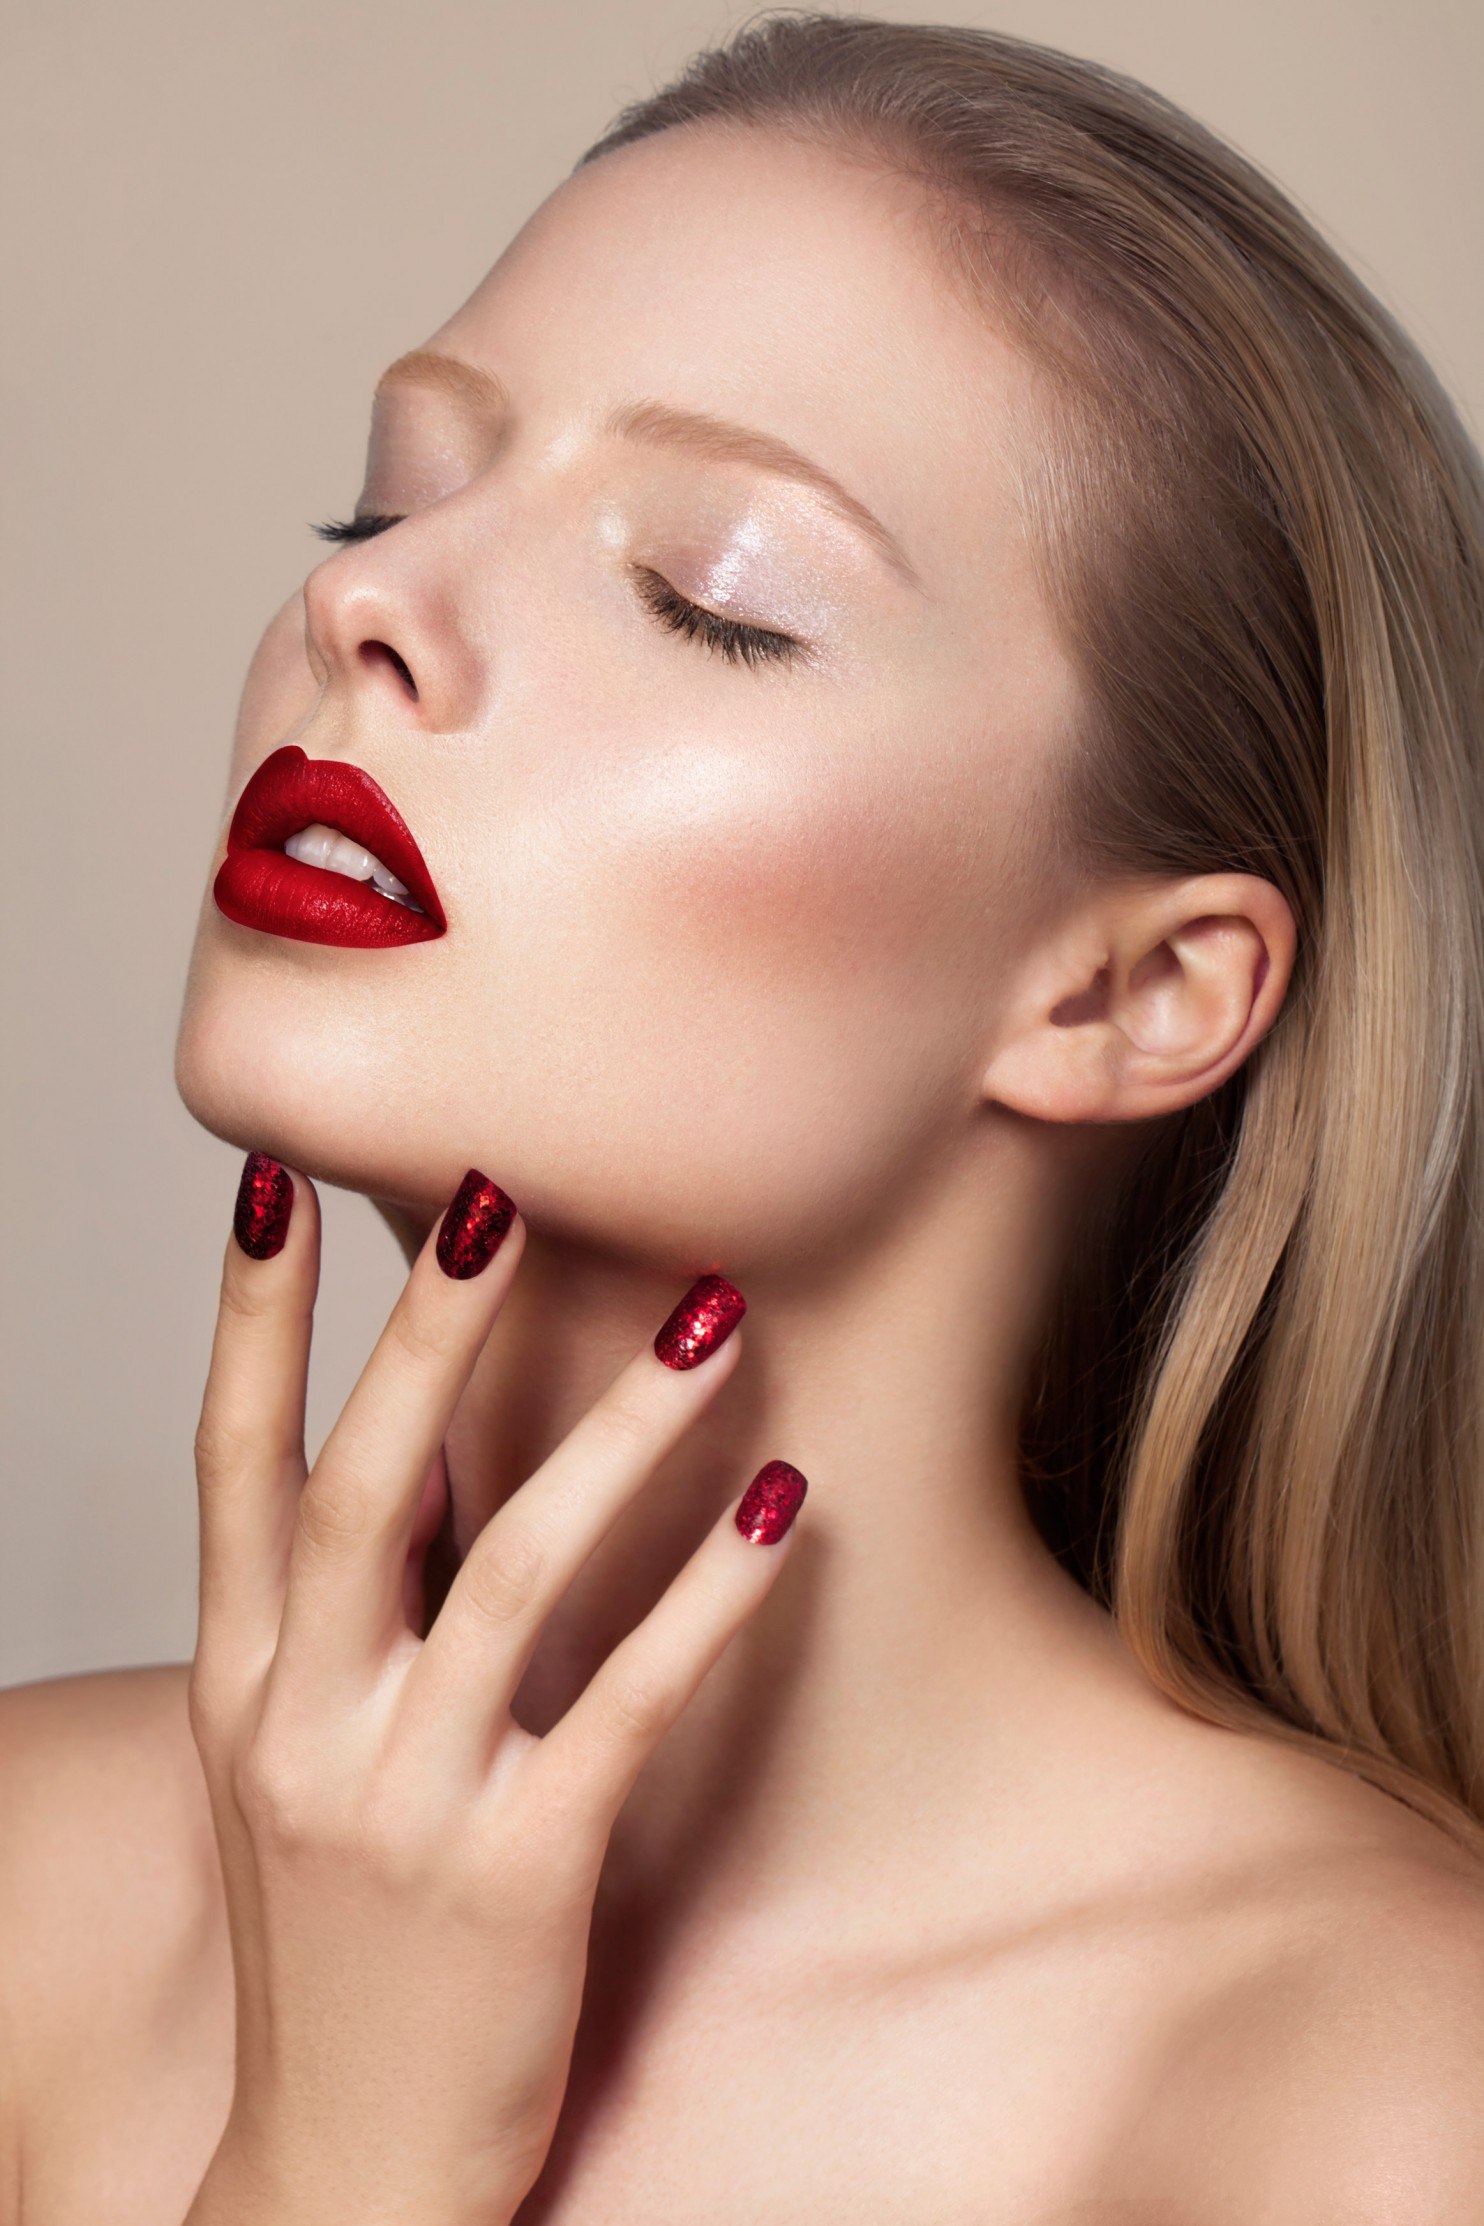 margaux-beauty-photography-photographer-red-pink-lips-blonde-make-up-campaign-london-ruth-rose-4